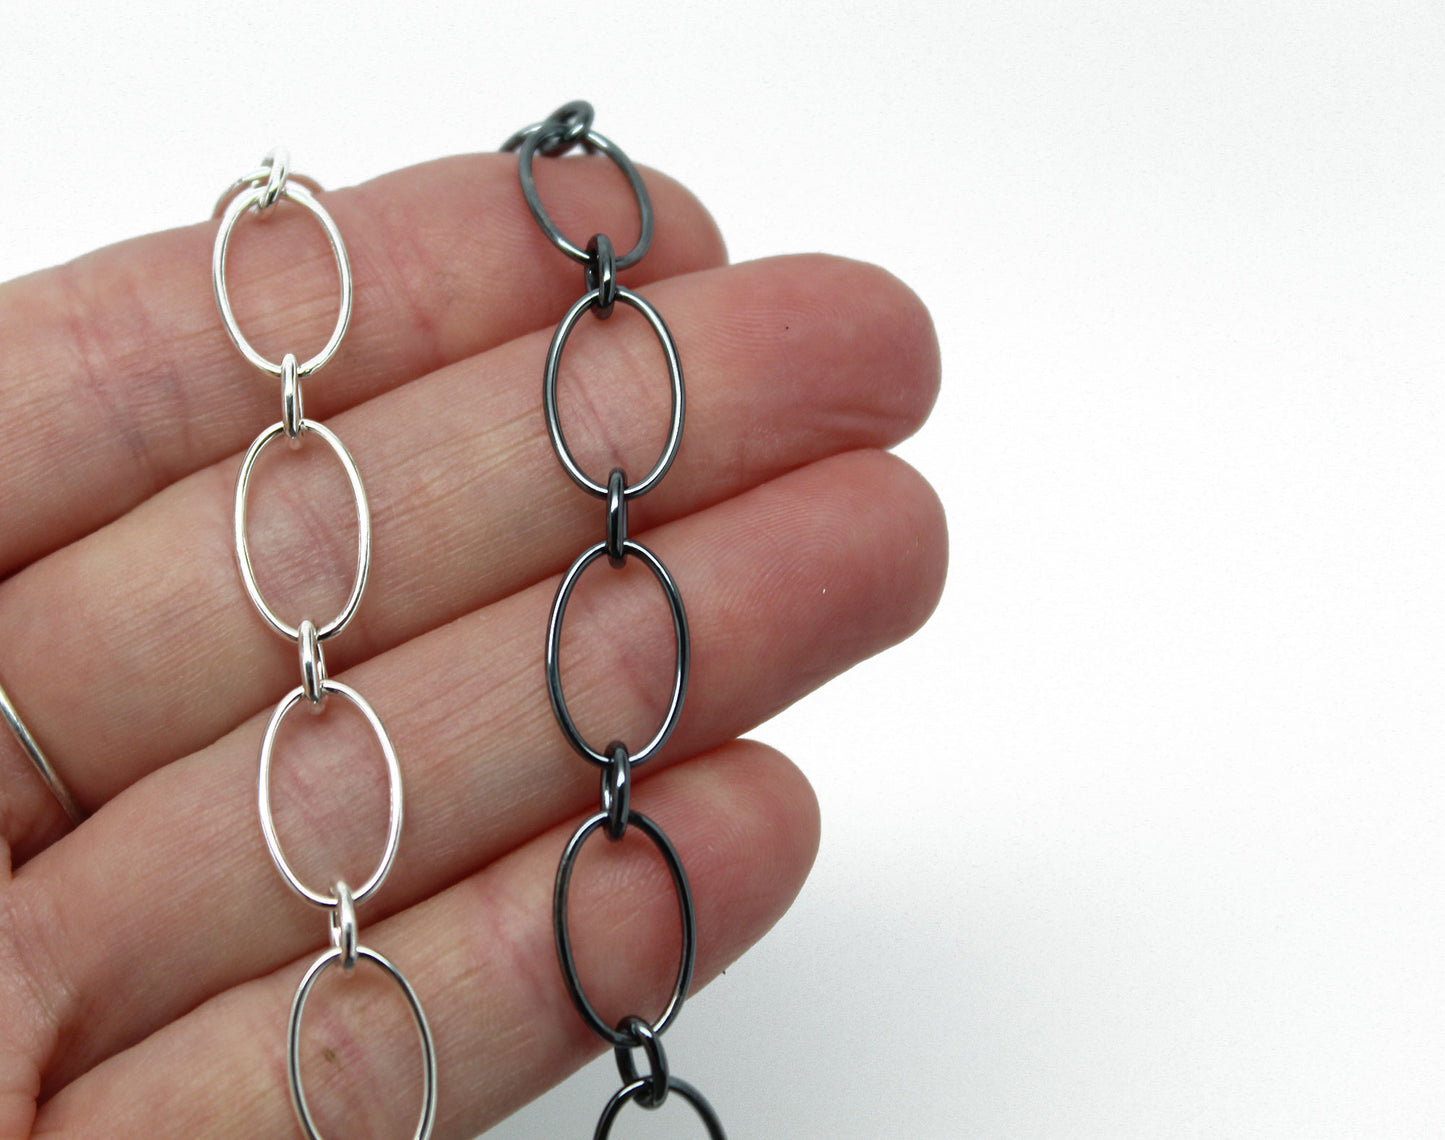 Load image into Gallery viewer, Oval Round Sterling Silver Chain Bracelet
